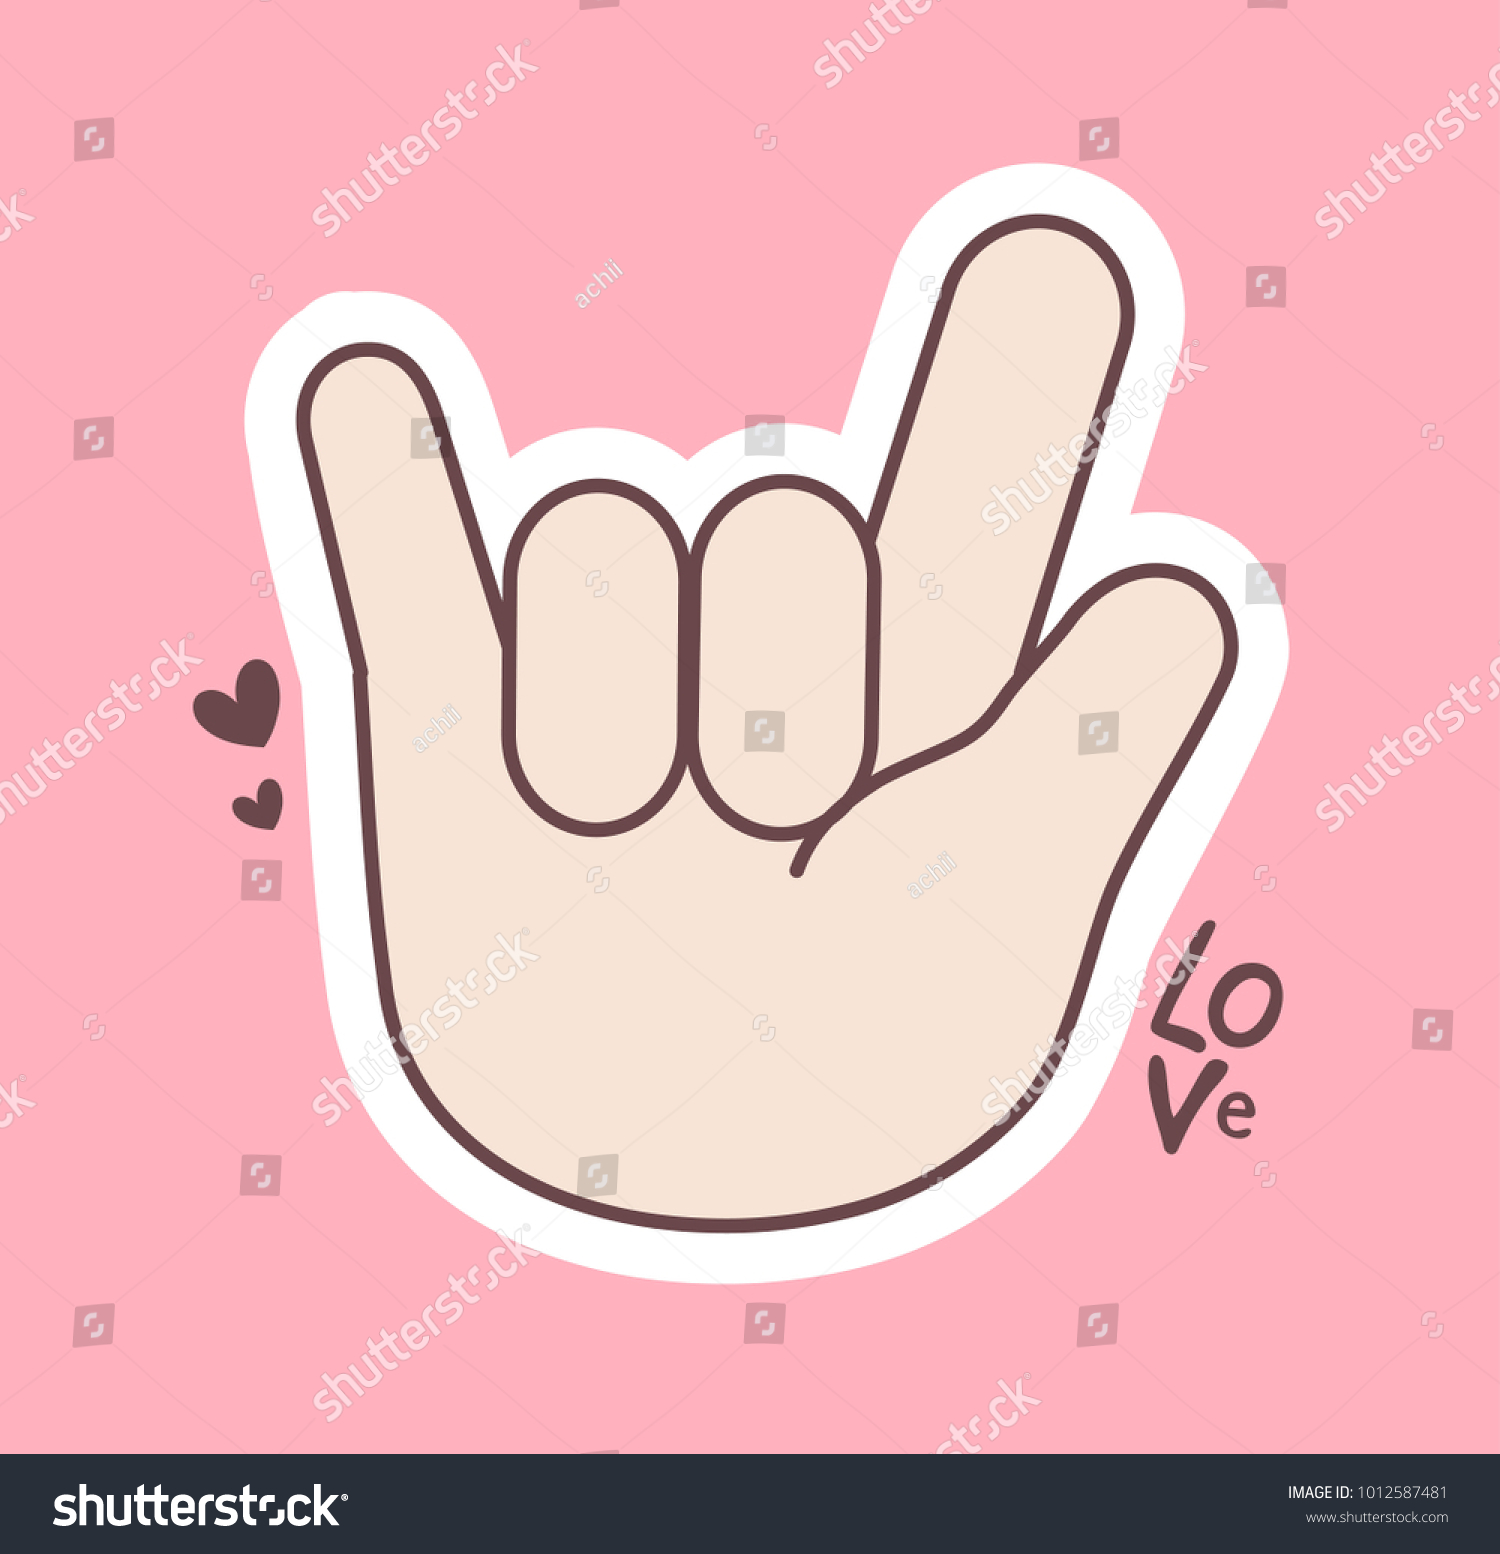 Love Youhand Sign Language Iconfinger Gesture Stock Vector Royalty Free